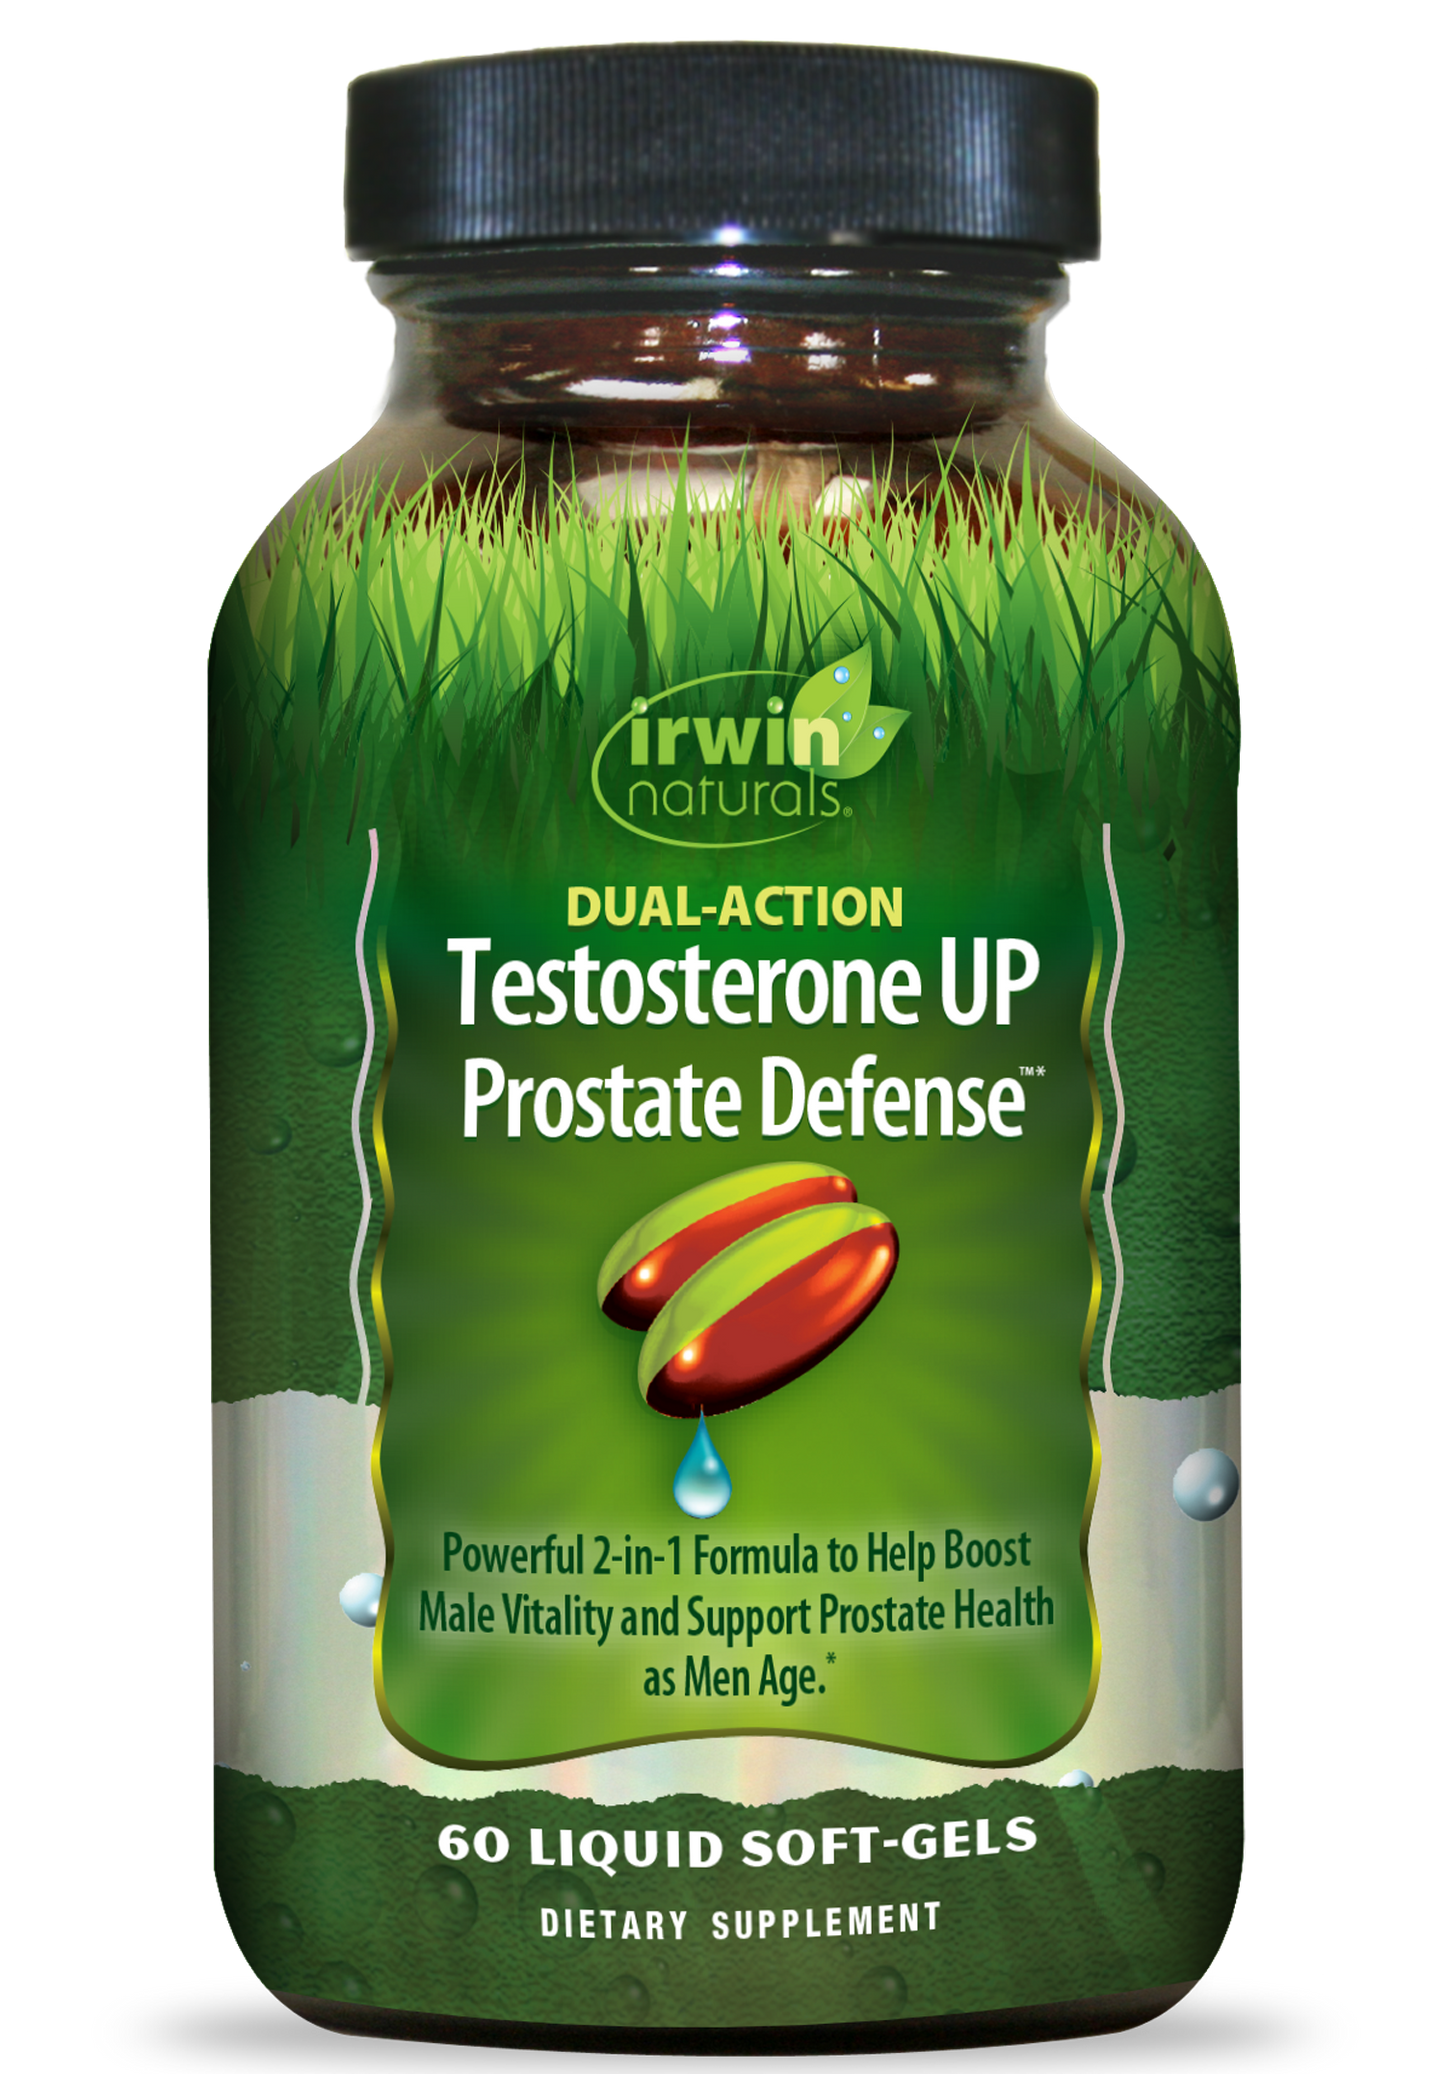 Dual-Action Testosterone UP Prostate Defense